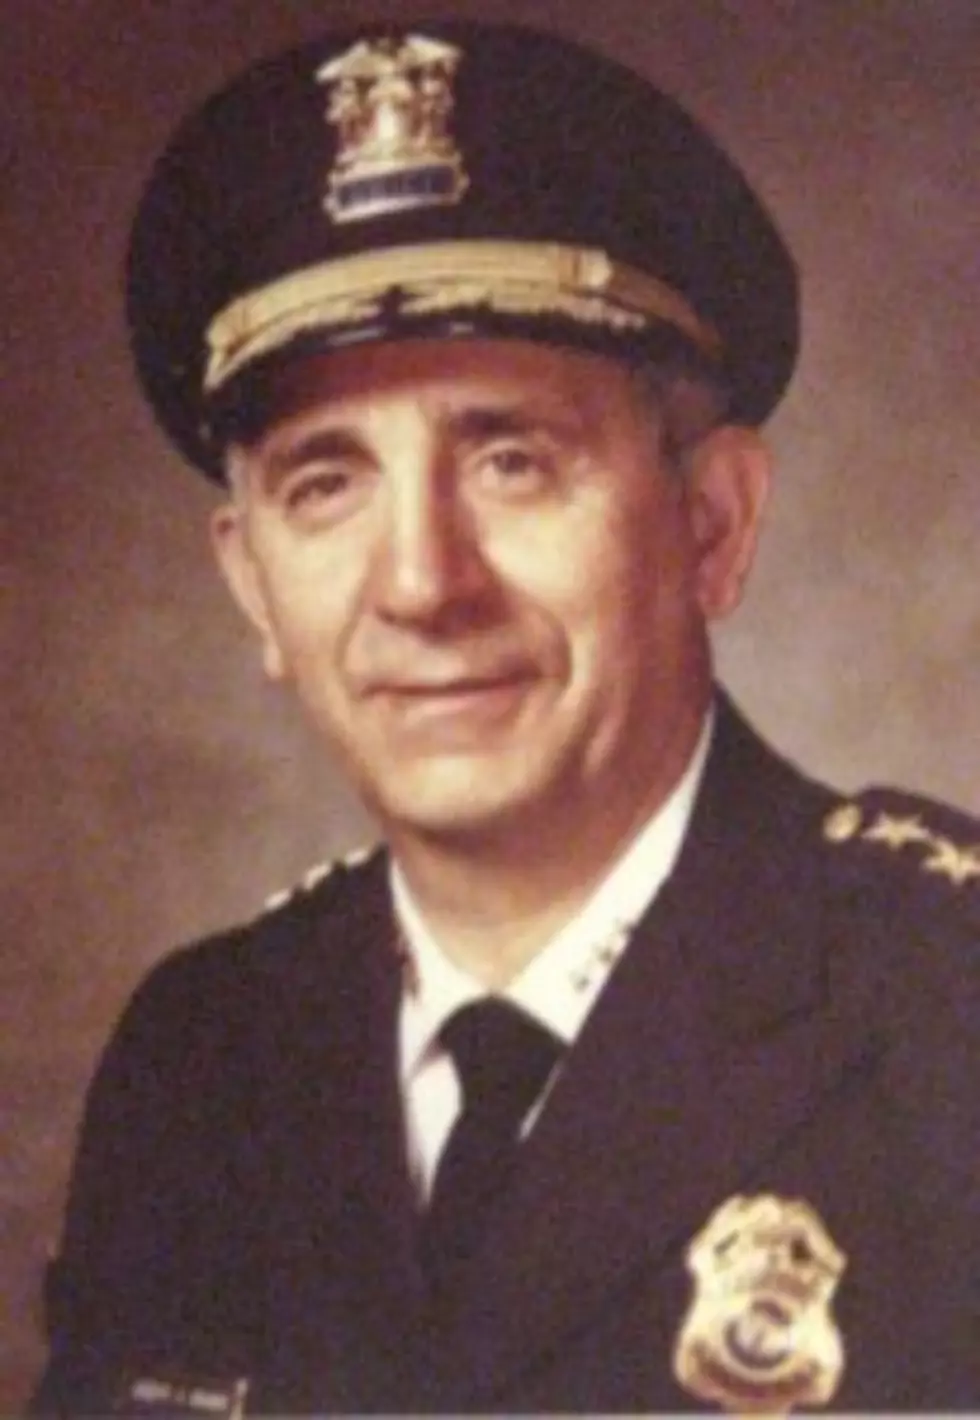 Former Rome Police Chief Dies